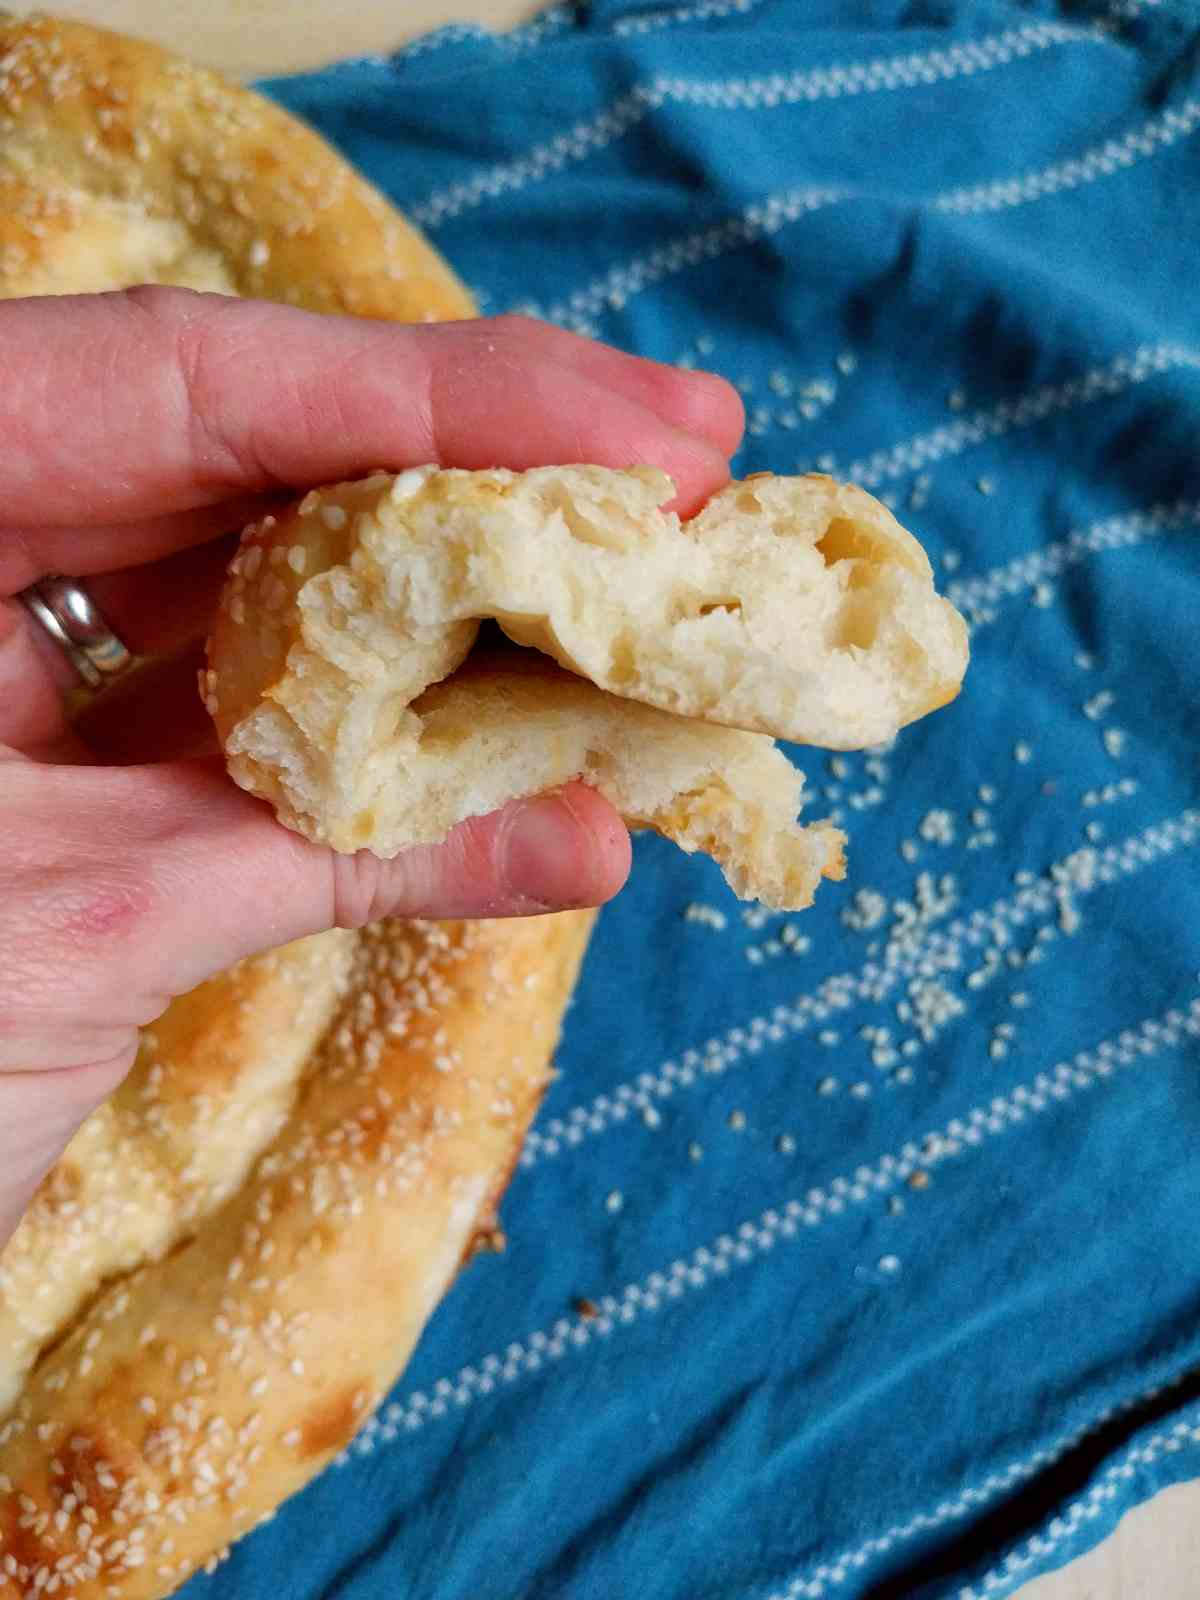 A piece of Turkish bread smooshed with a hand.